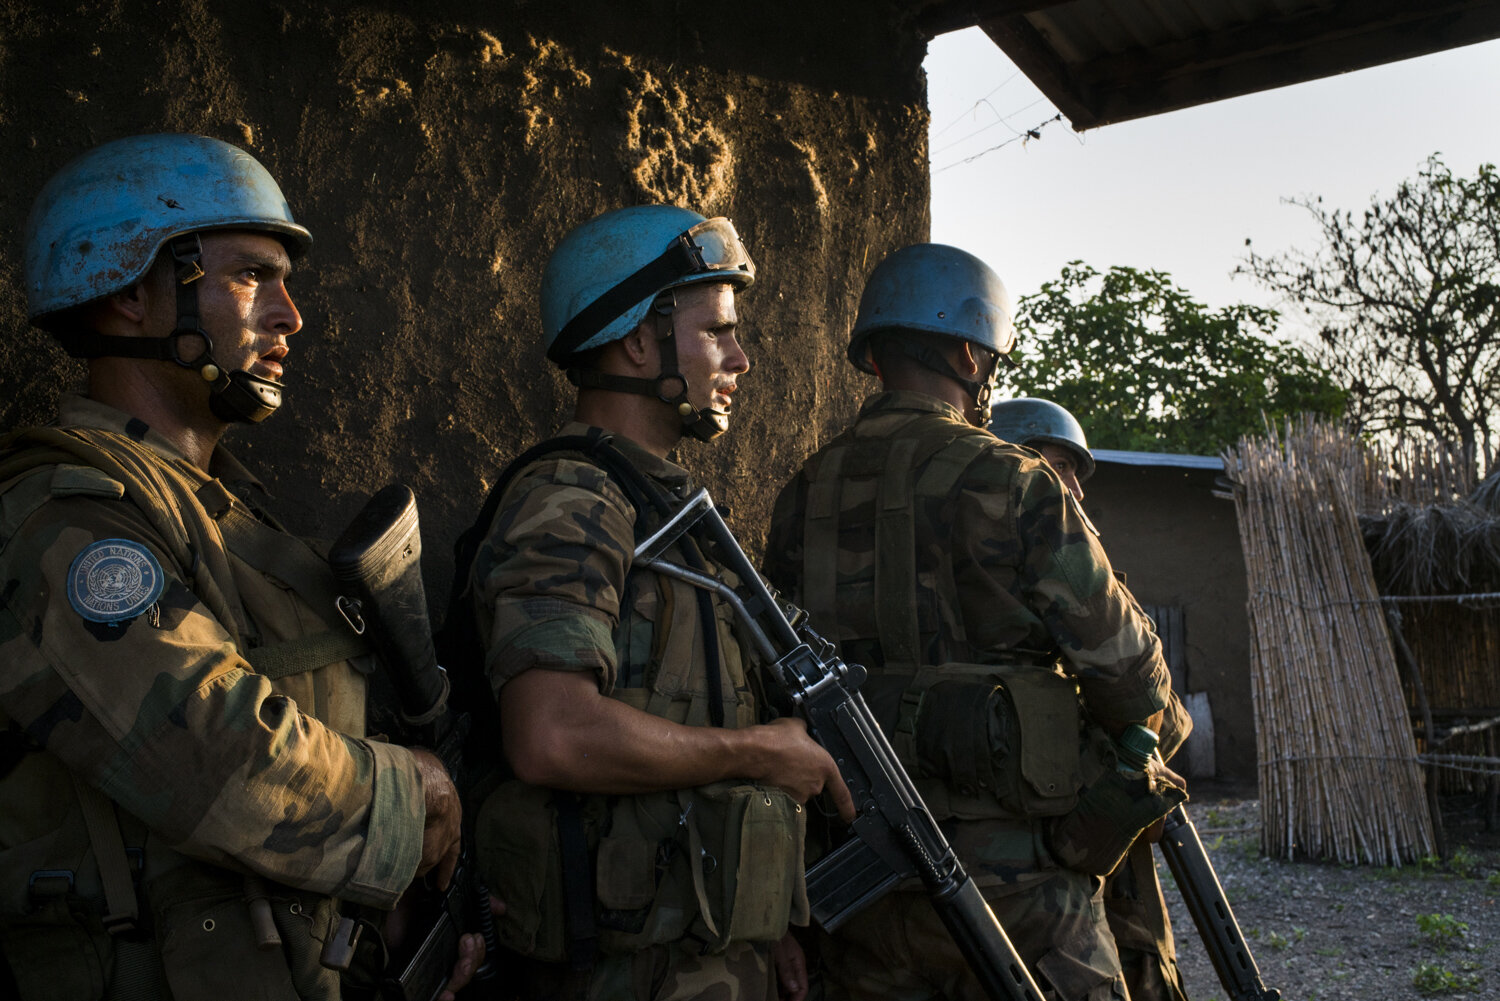  Uruguyan peacekeepers reach Ghbi, one of the extremely remote villages on the coast of Lake Albert that has been deserted since March 12, when attackers burned down homes and left a reported 42 massacred in this area. On March 16th, the peacekeepers